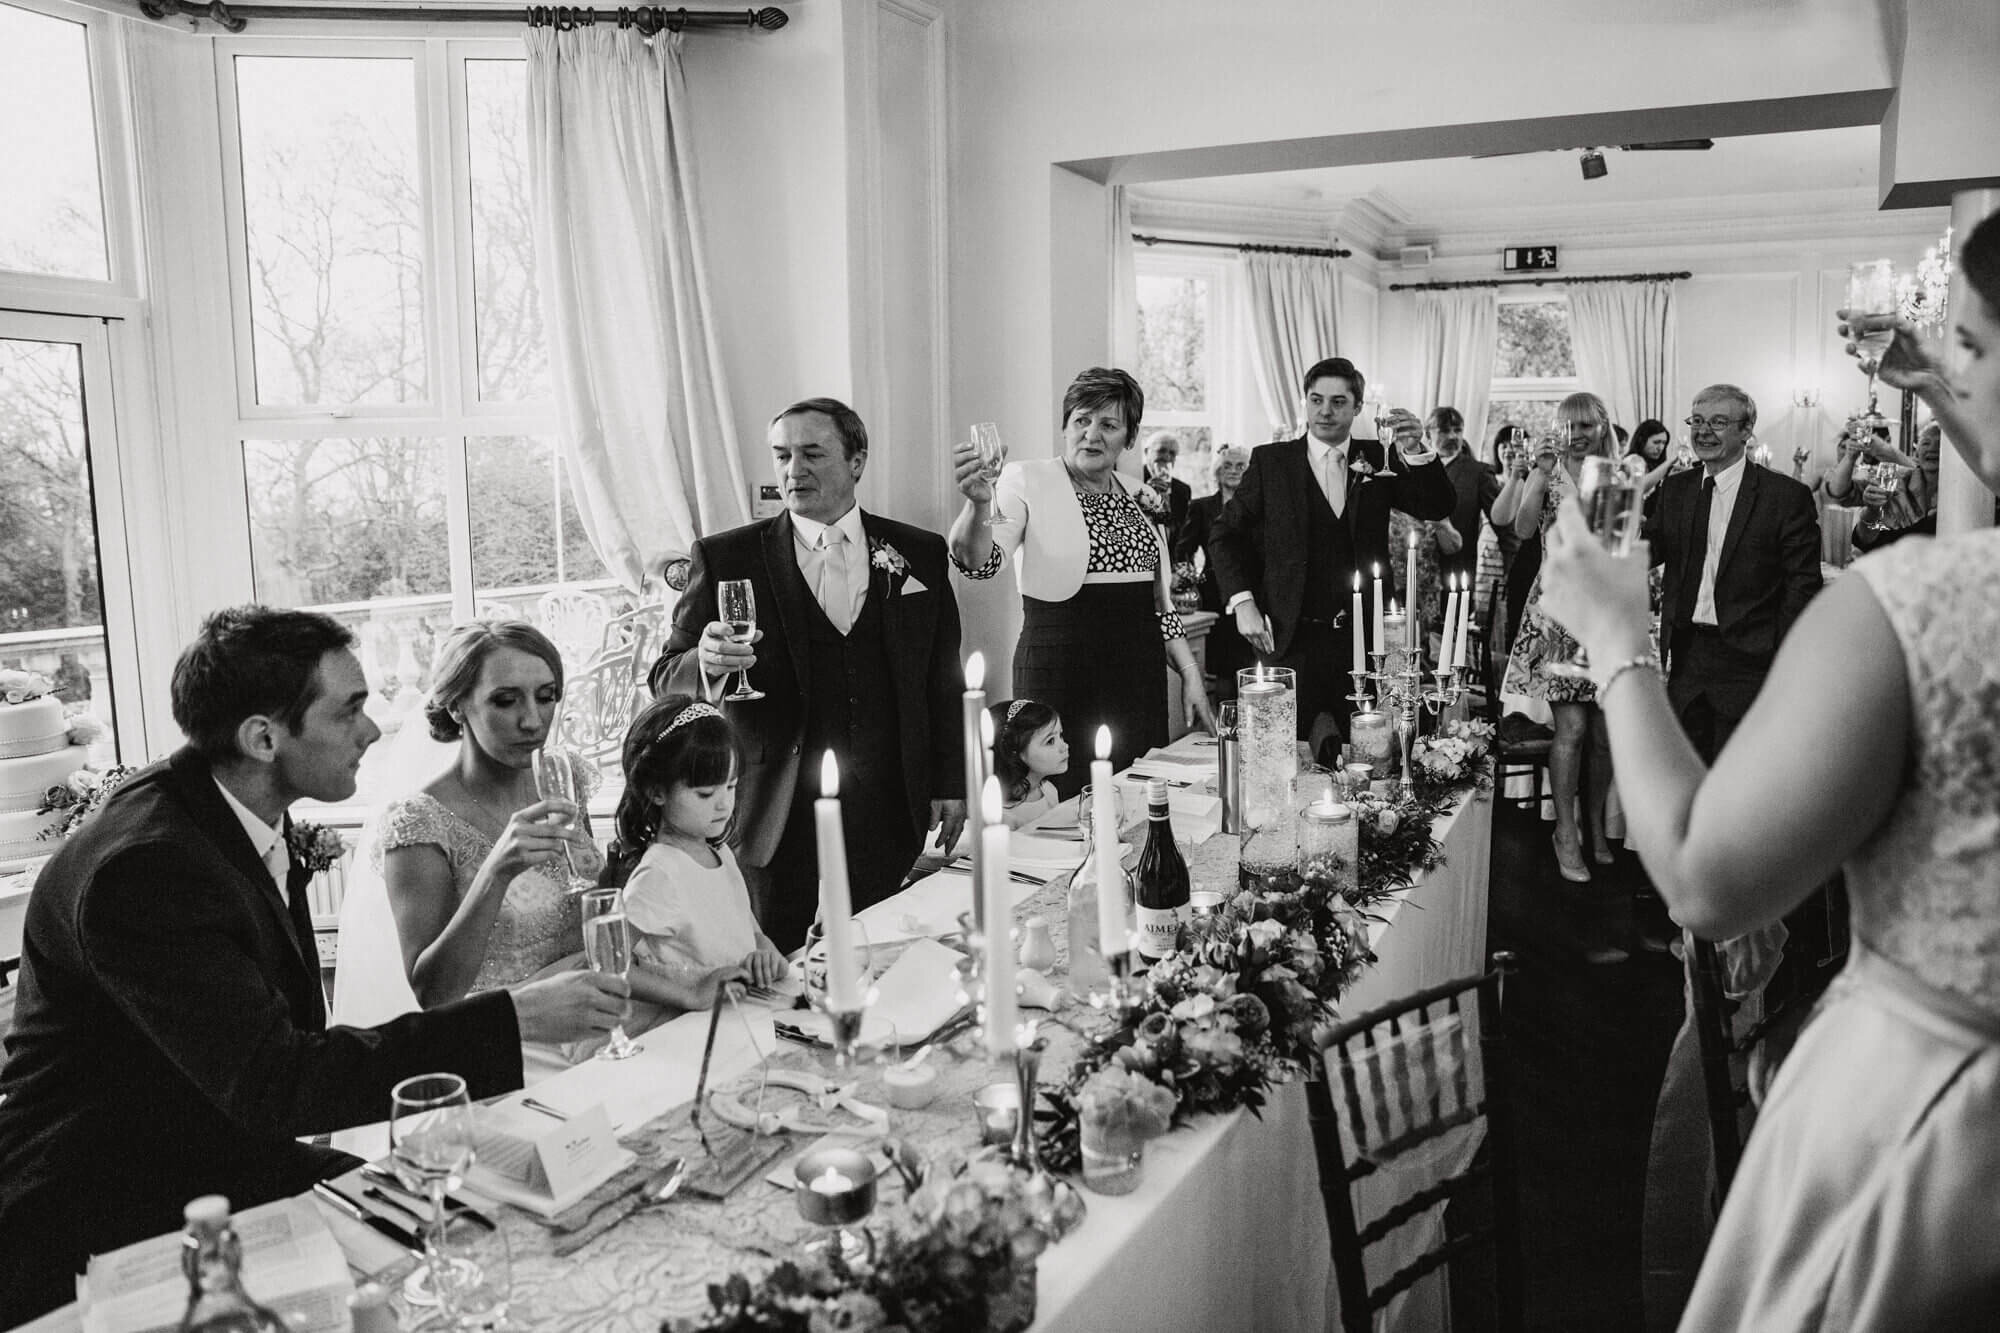 wedding guests raise toast to newlyweds at end of speeches